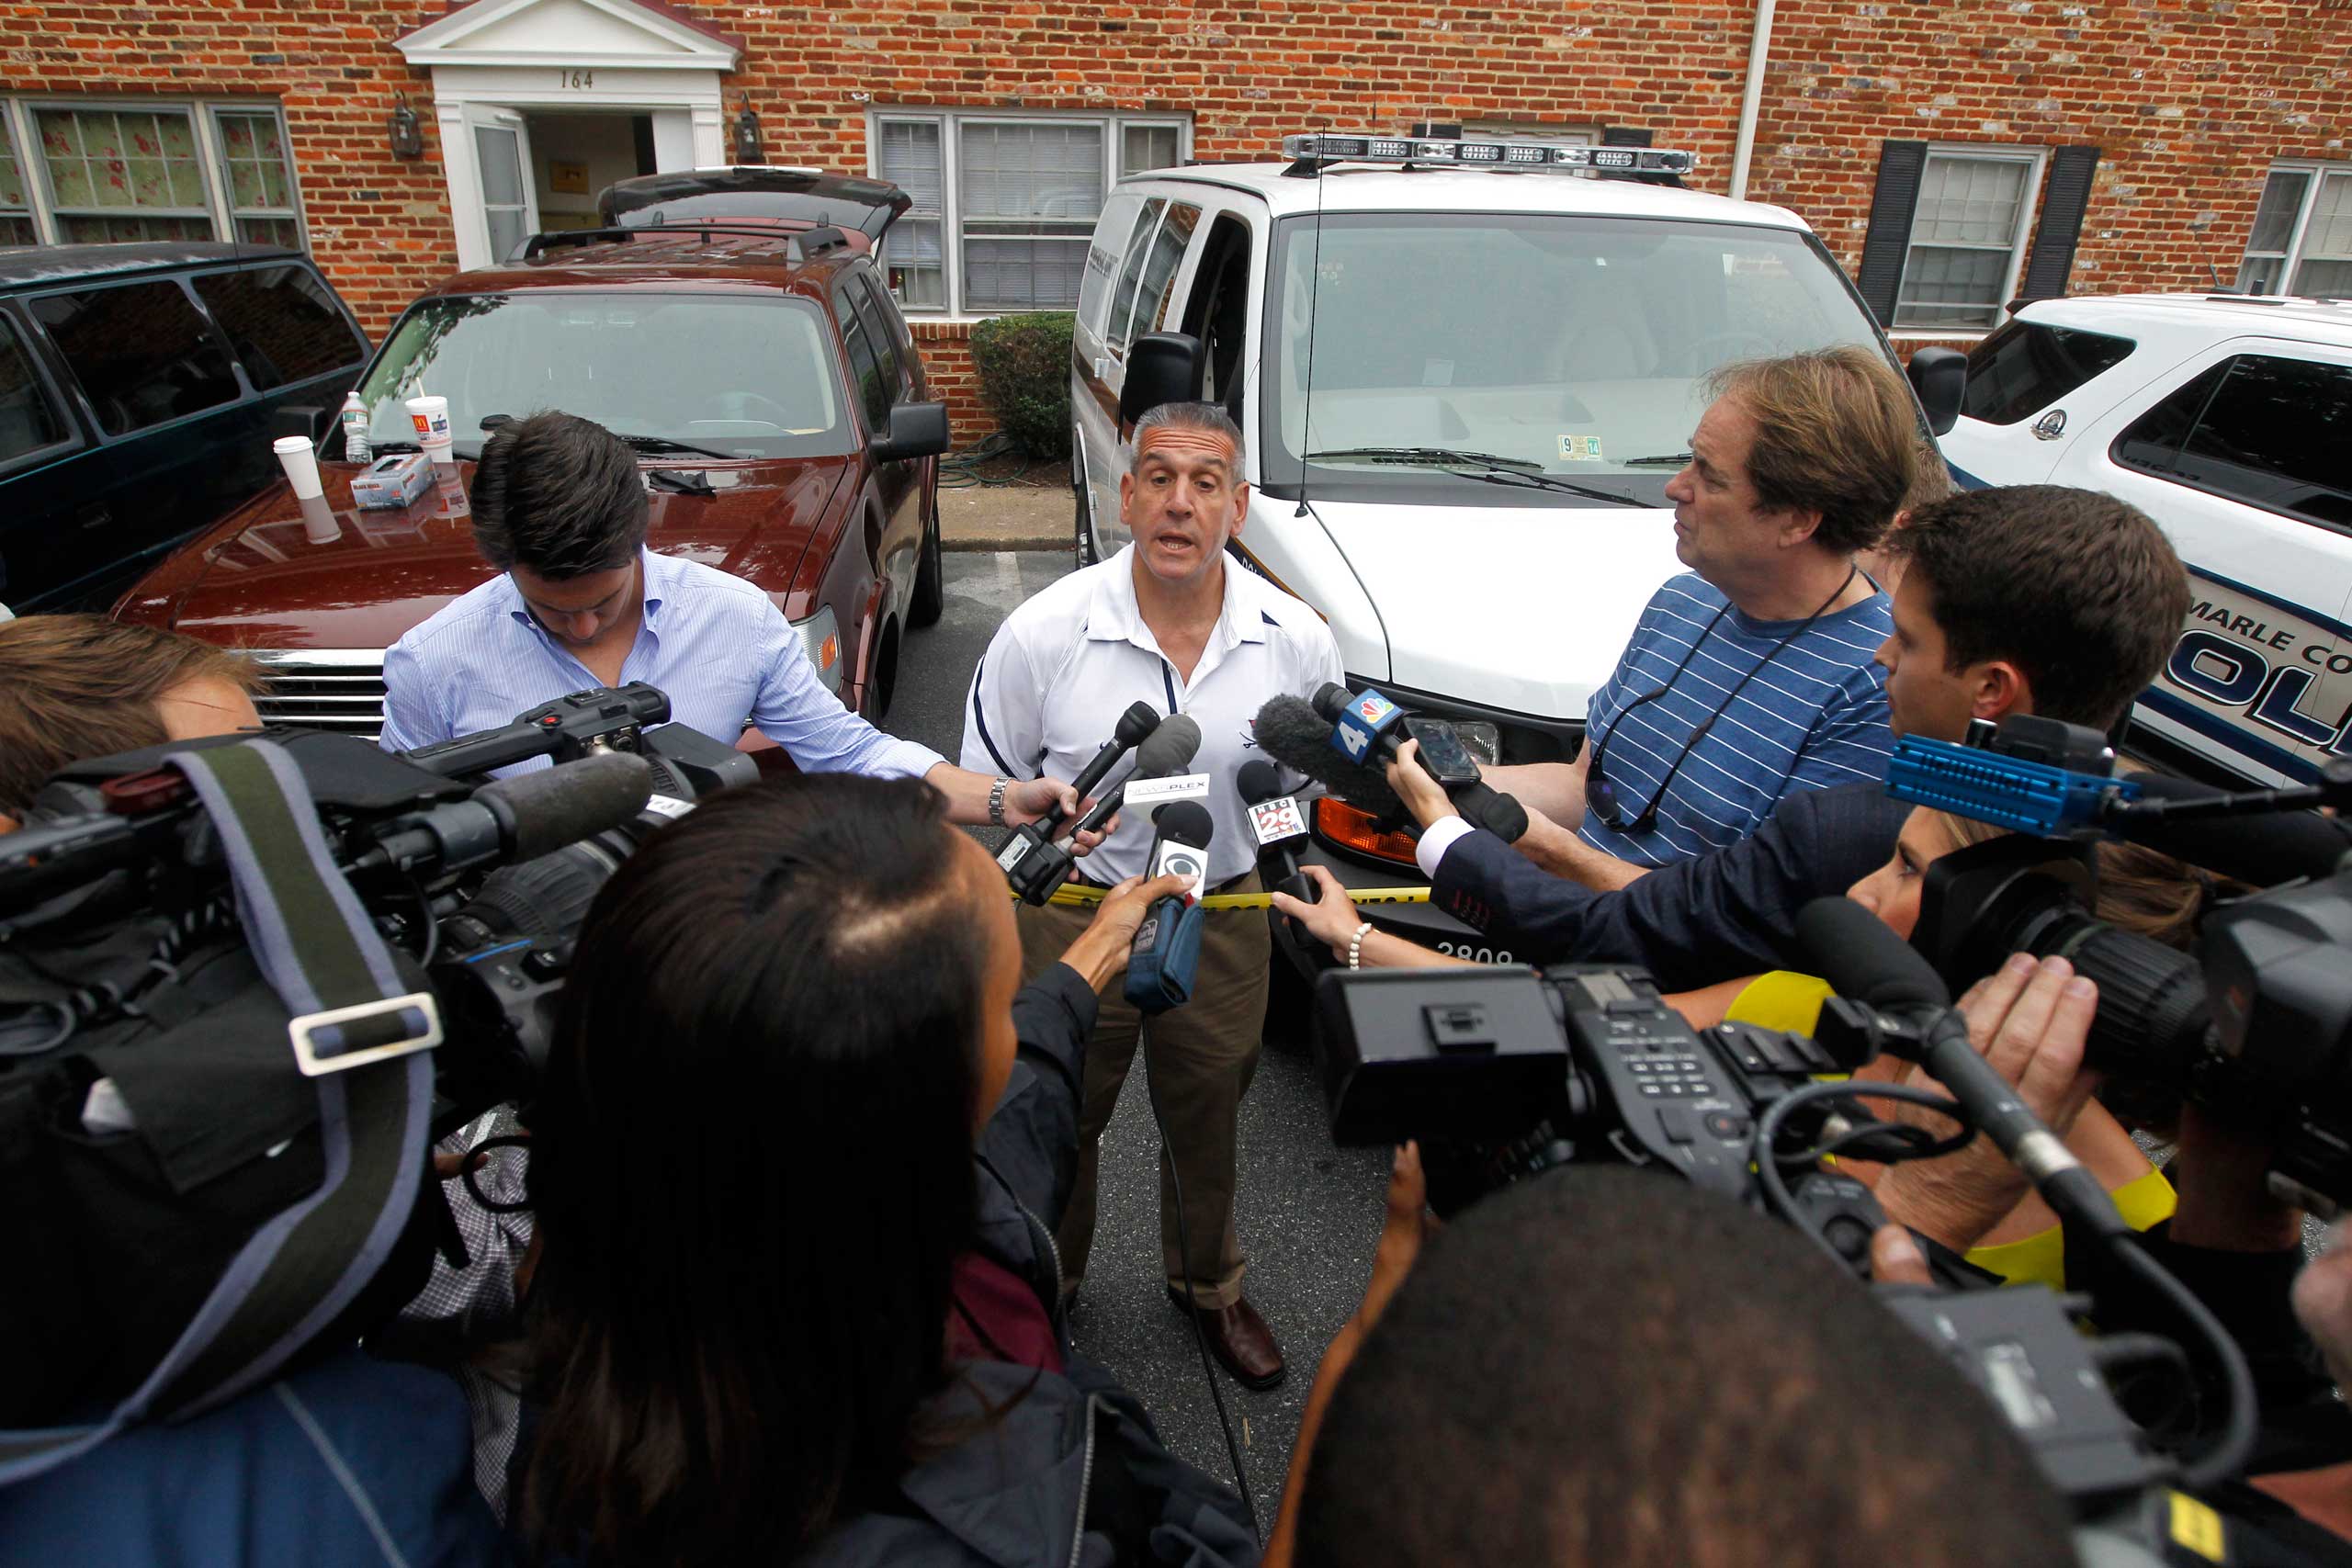 Police Chief Timothy J. Longo speaks with reporters at a Hessian Hills apartment as the search for missing University of Virginia student Hannah Graham continues, Sept. 19, 2014 in Charlottesville, Va. (Ryan M. Kelly—AP)